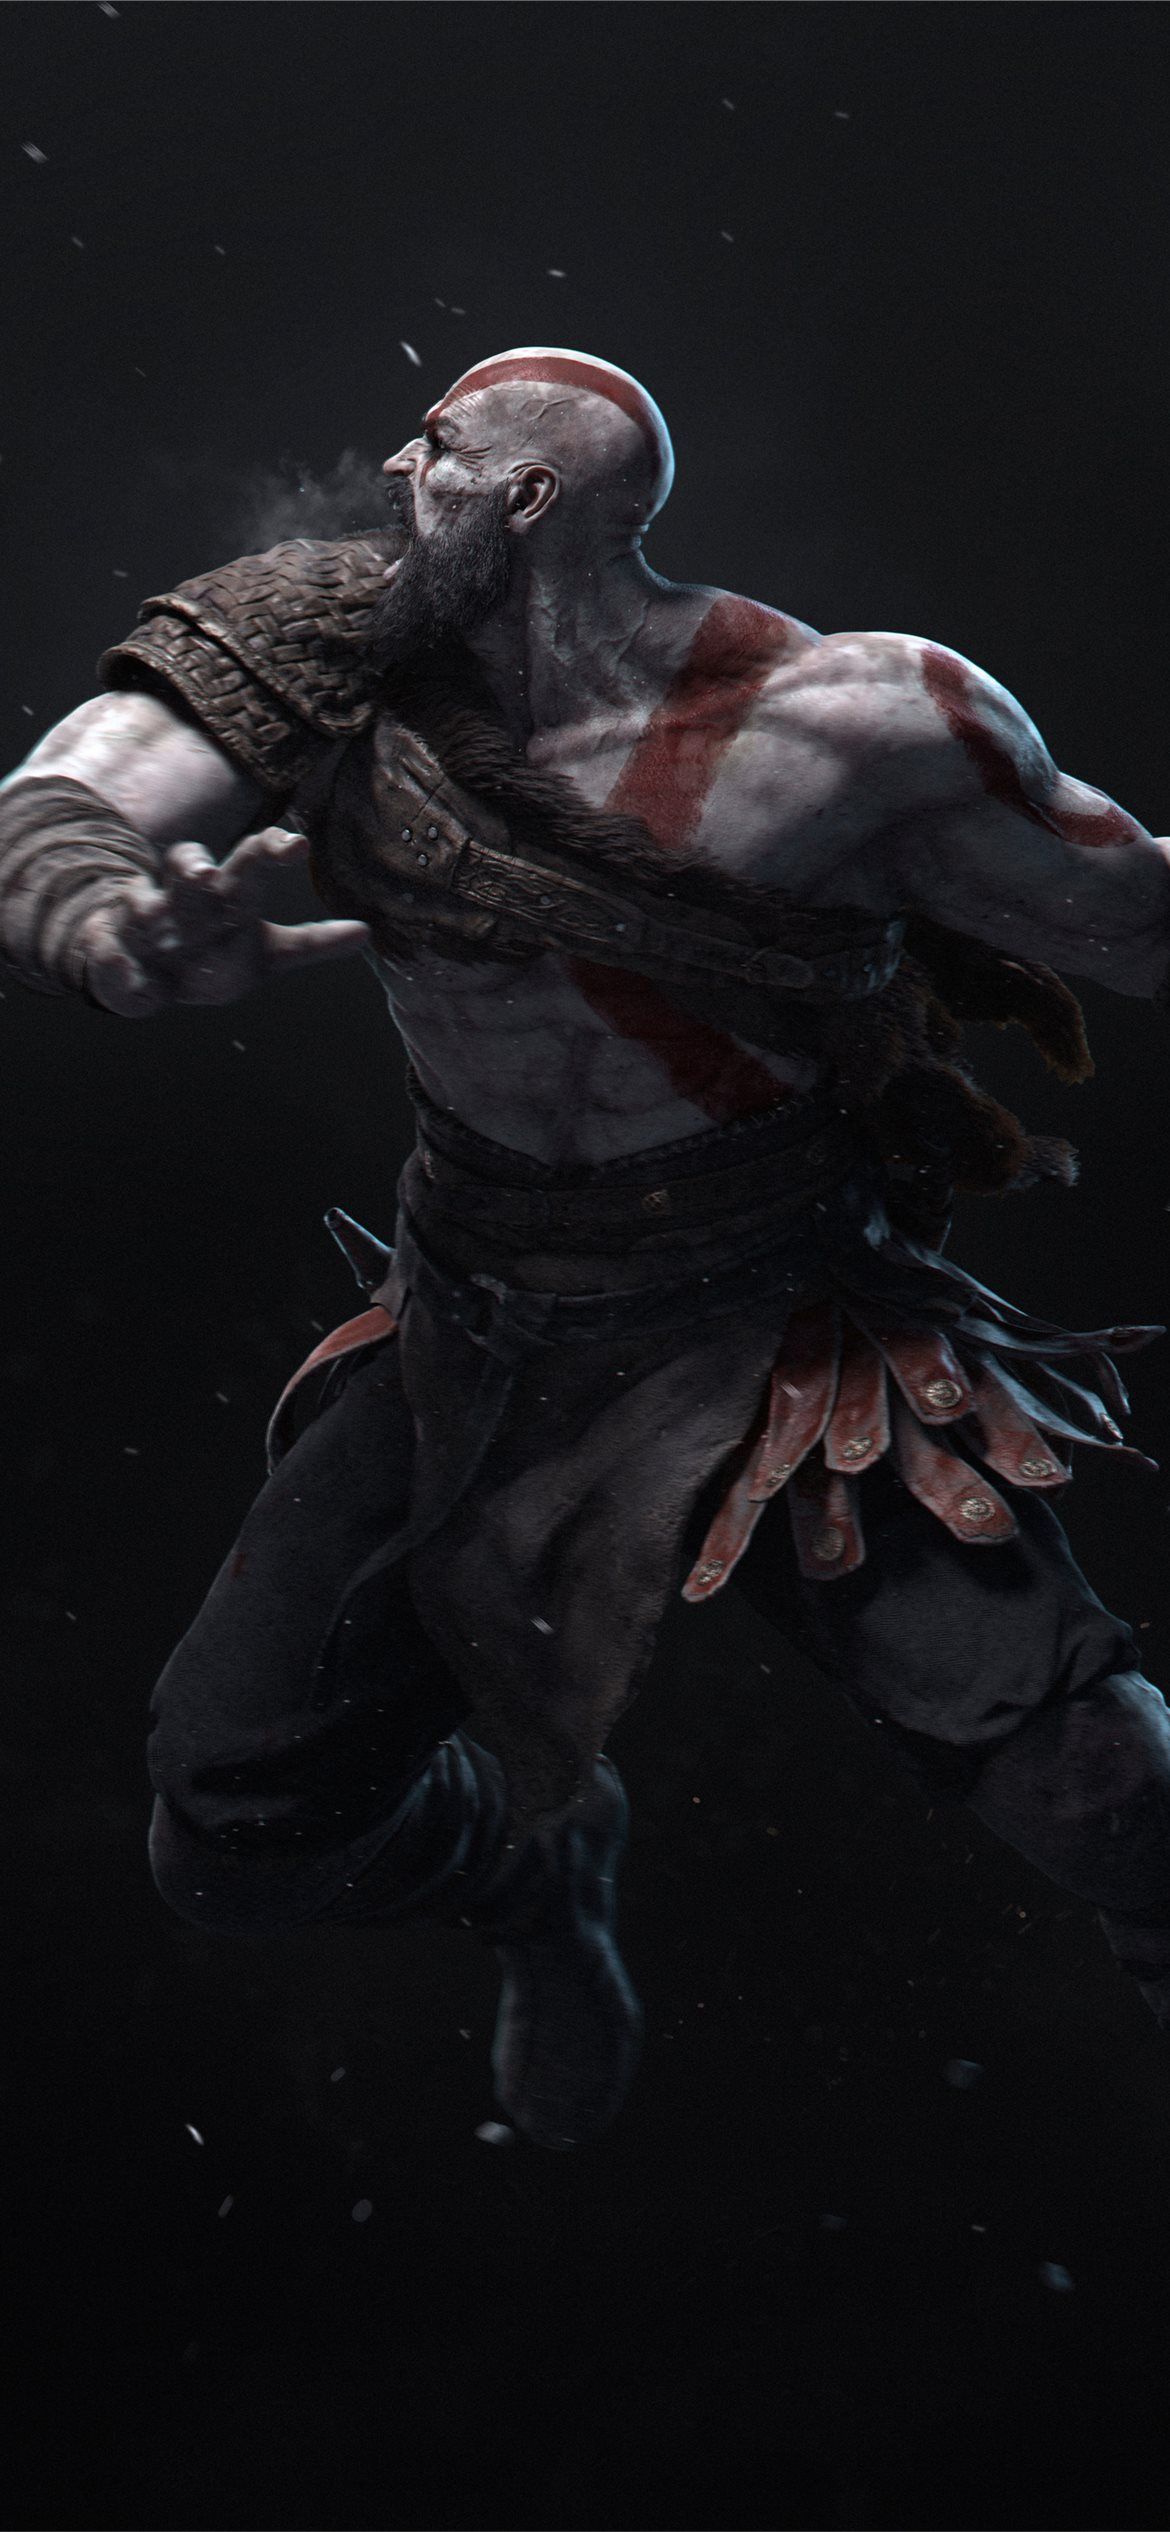 kratos hitting with axe 4k iPhone 12 Wallpaper Free Download